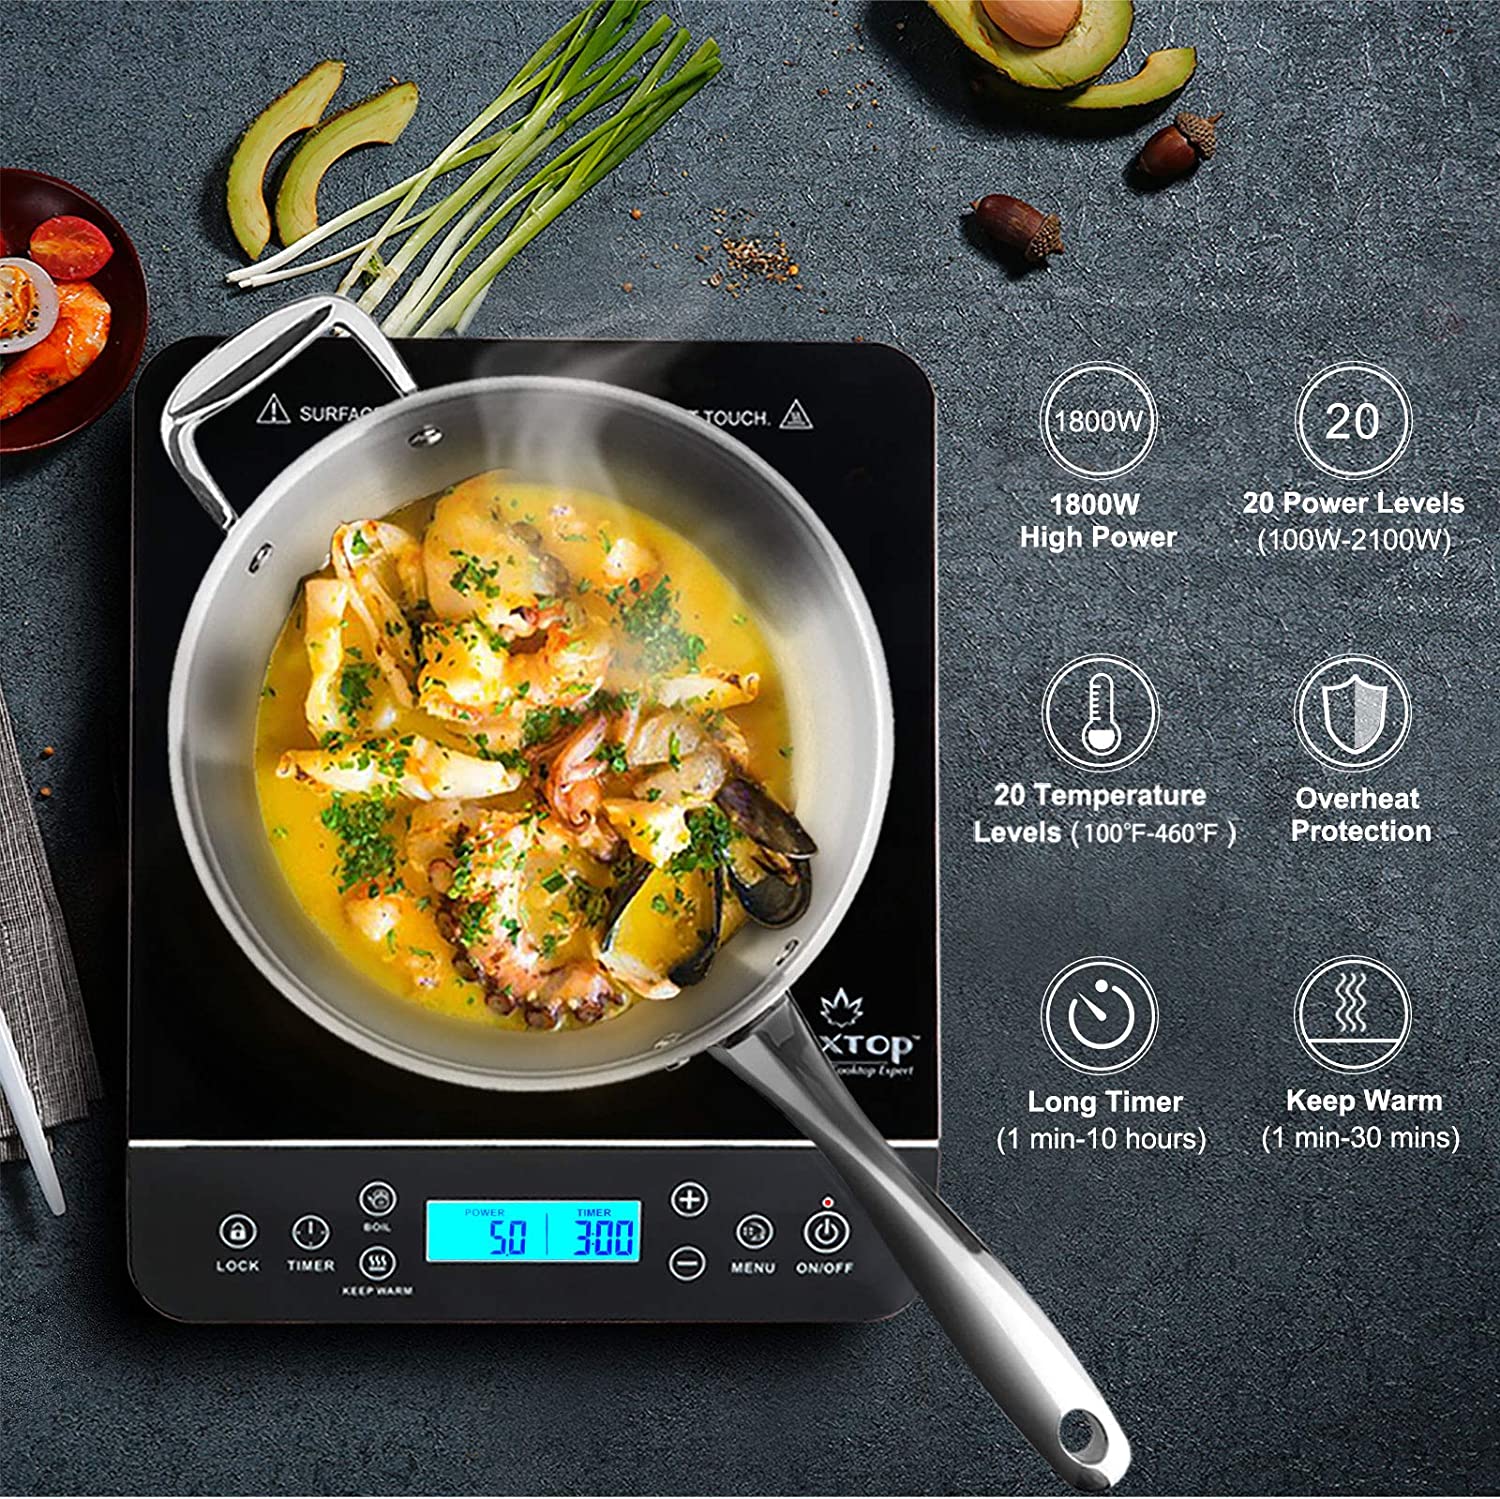 https://discounttoday.net/wp-content/uploads/2022/10/Duxtop-Portable-Induction-Cooktop-Countertop-Burner-Induction-Hot-Plate-with-LCD-Sensor-Touch-1800-Watts-Silver-9600LS-BT-200DZ1.jpg